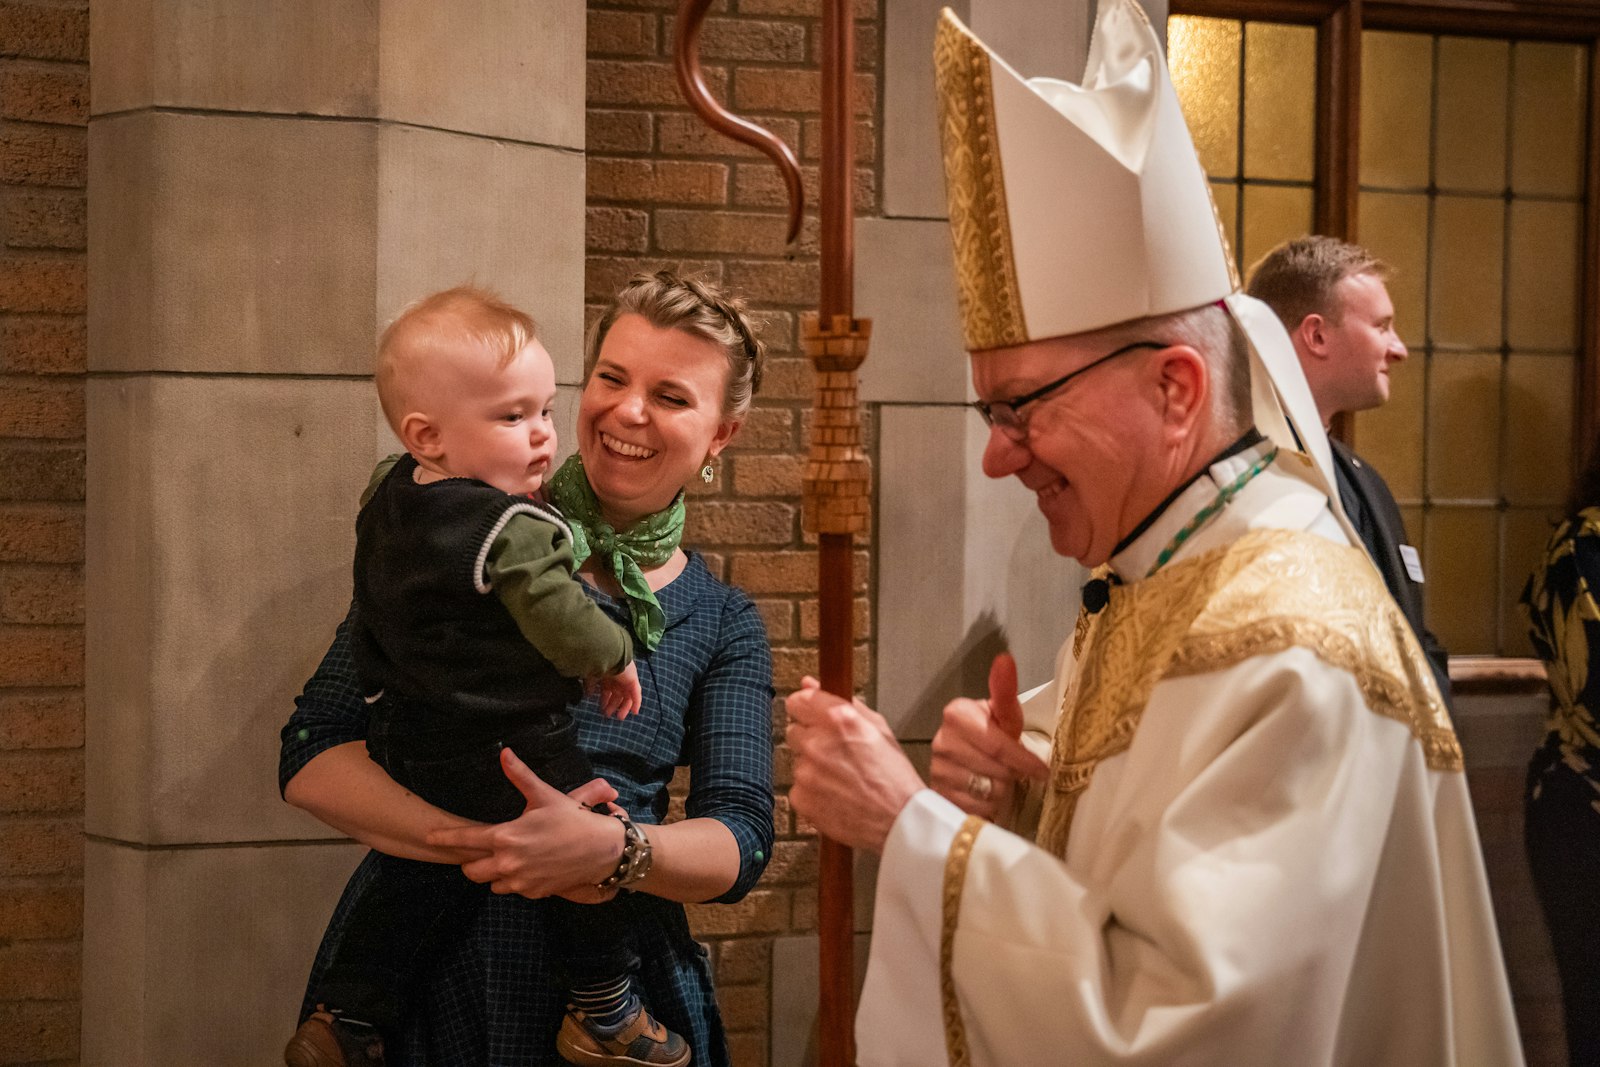 Detroit Auxiliary Bishop Jeffrey M. Monforton smiles at a baby at the 14th annual Dinner for Life at Sacred Heart Major Seminary. Bishop Monforton was rector at the seminary when the first Dinner for Life was organized in 2006.